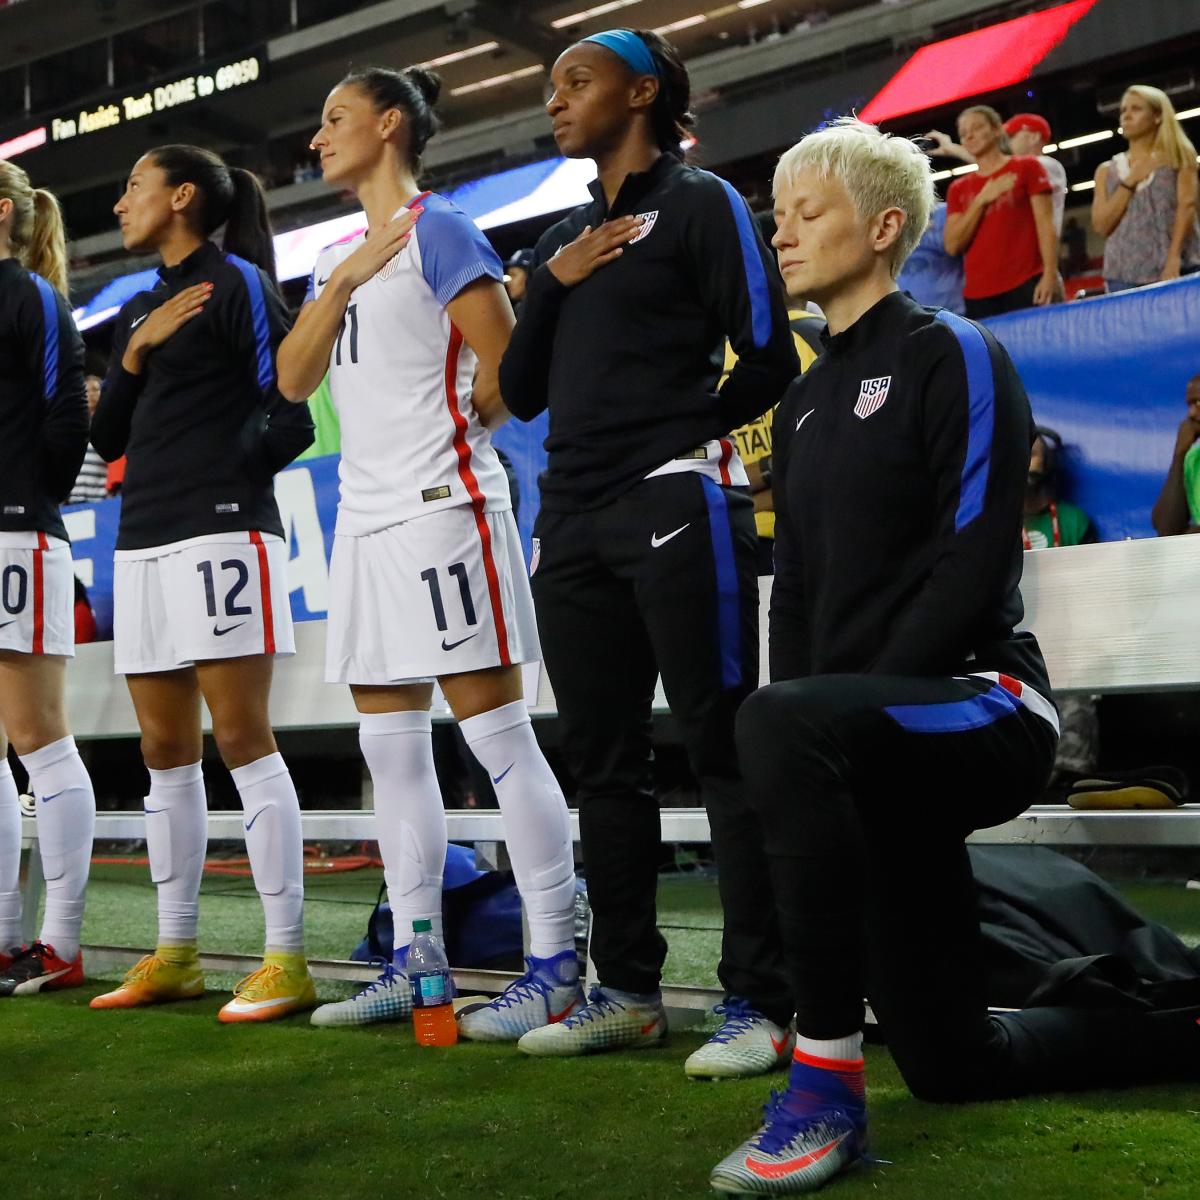 Us Soccer Repeals 2017 Ban On Kneeling During National Anthem Apologizes News Scores